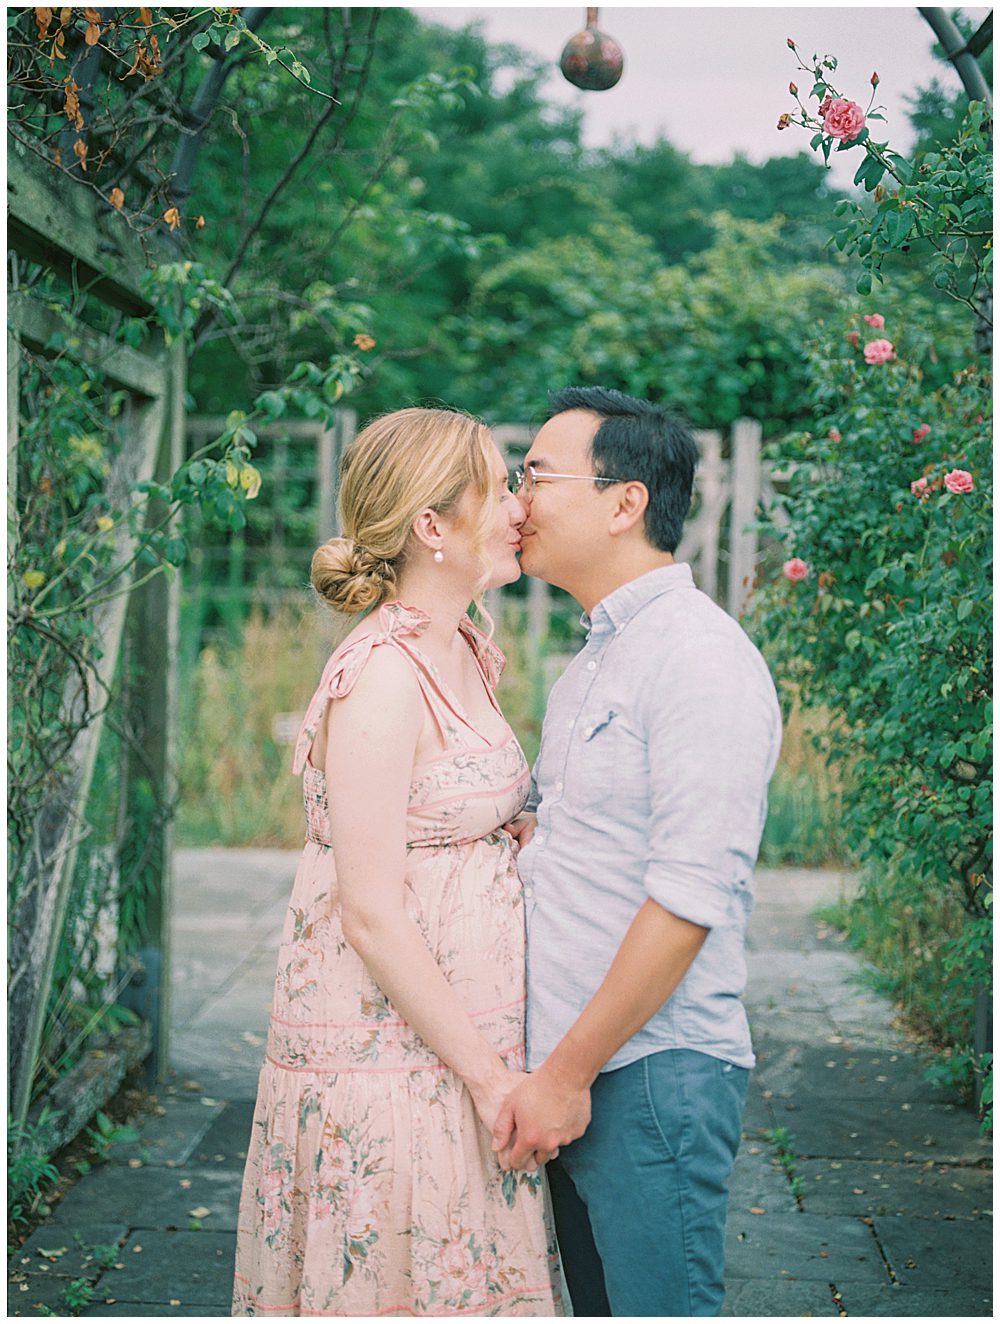 Husband and wife face each other and kiss during their National Arboretum maternity session under floral arch.